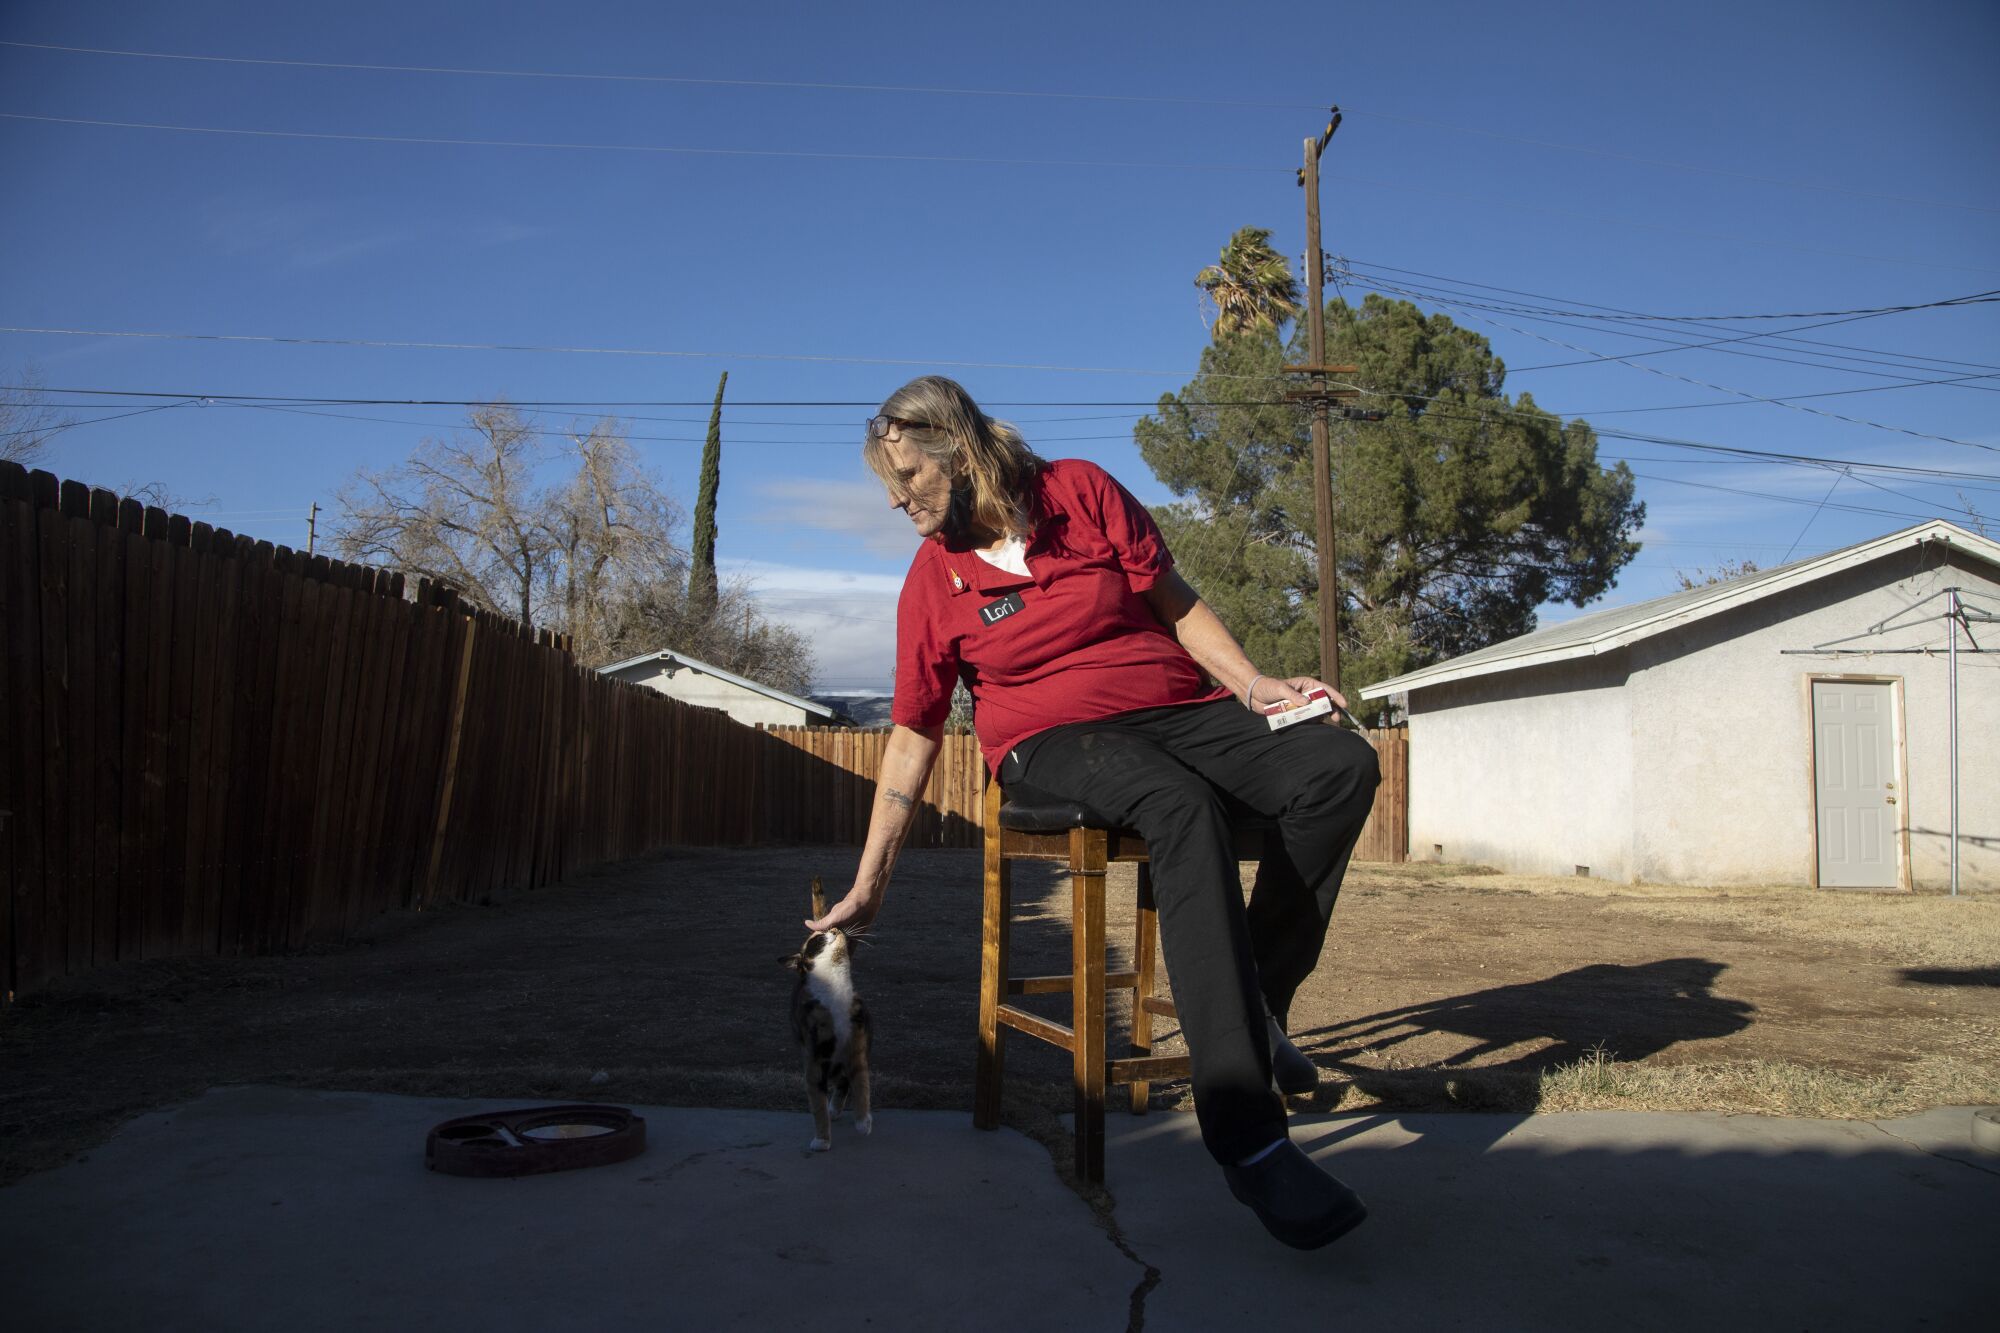 Lori Castro pets a stray cat while smoking a cigarette in the backyard of a shared house in Palmdale. 